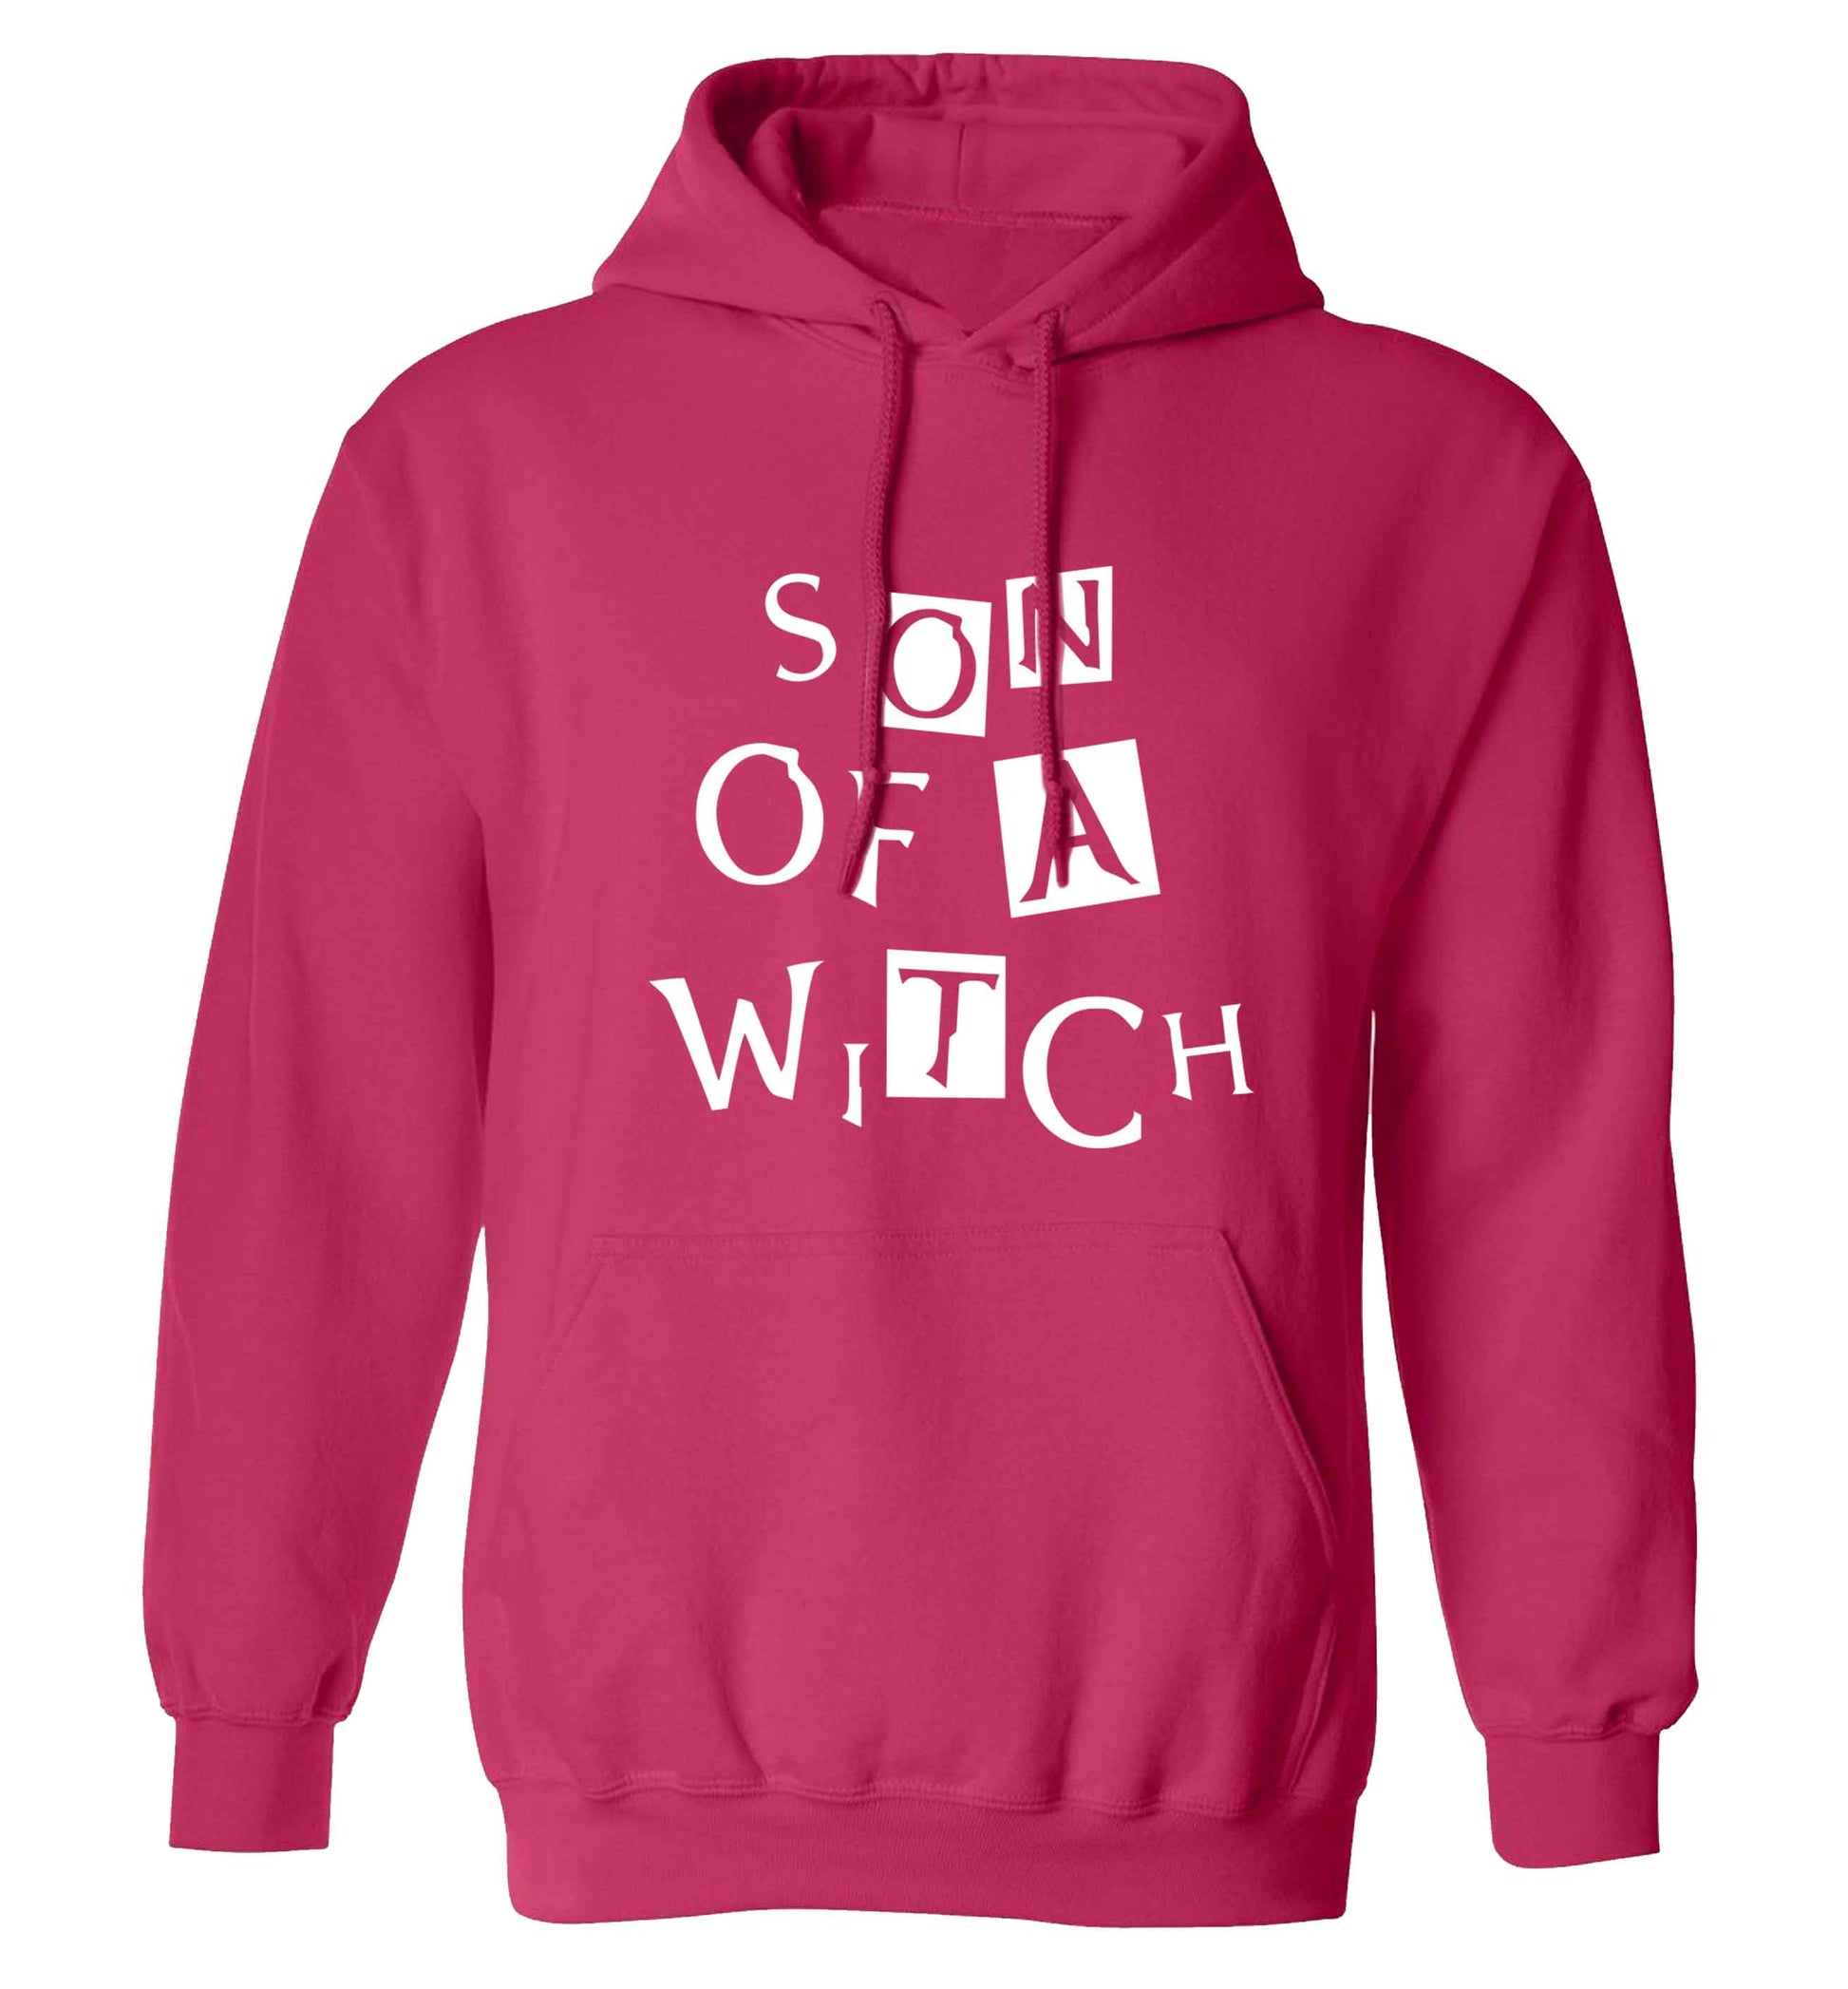 Son of a witch adults unisex pink hoodie 2XL